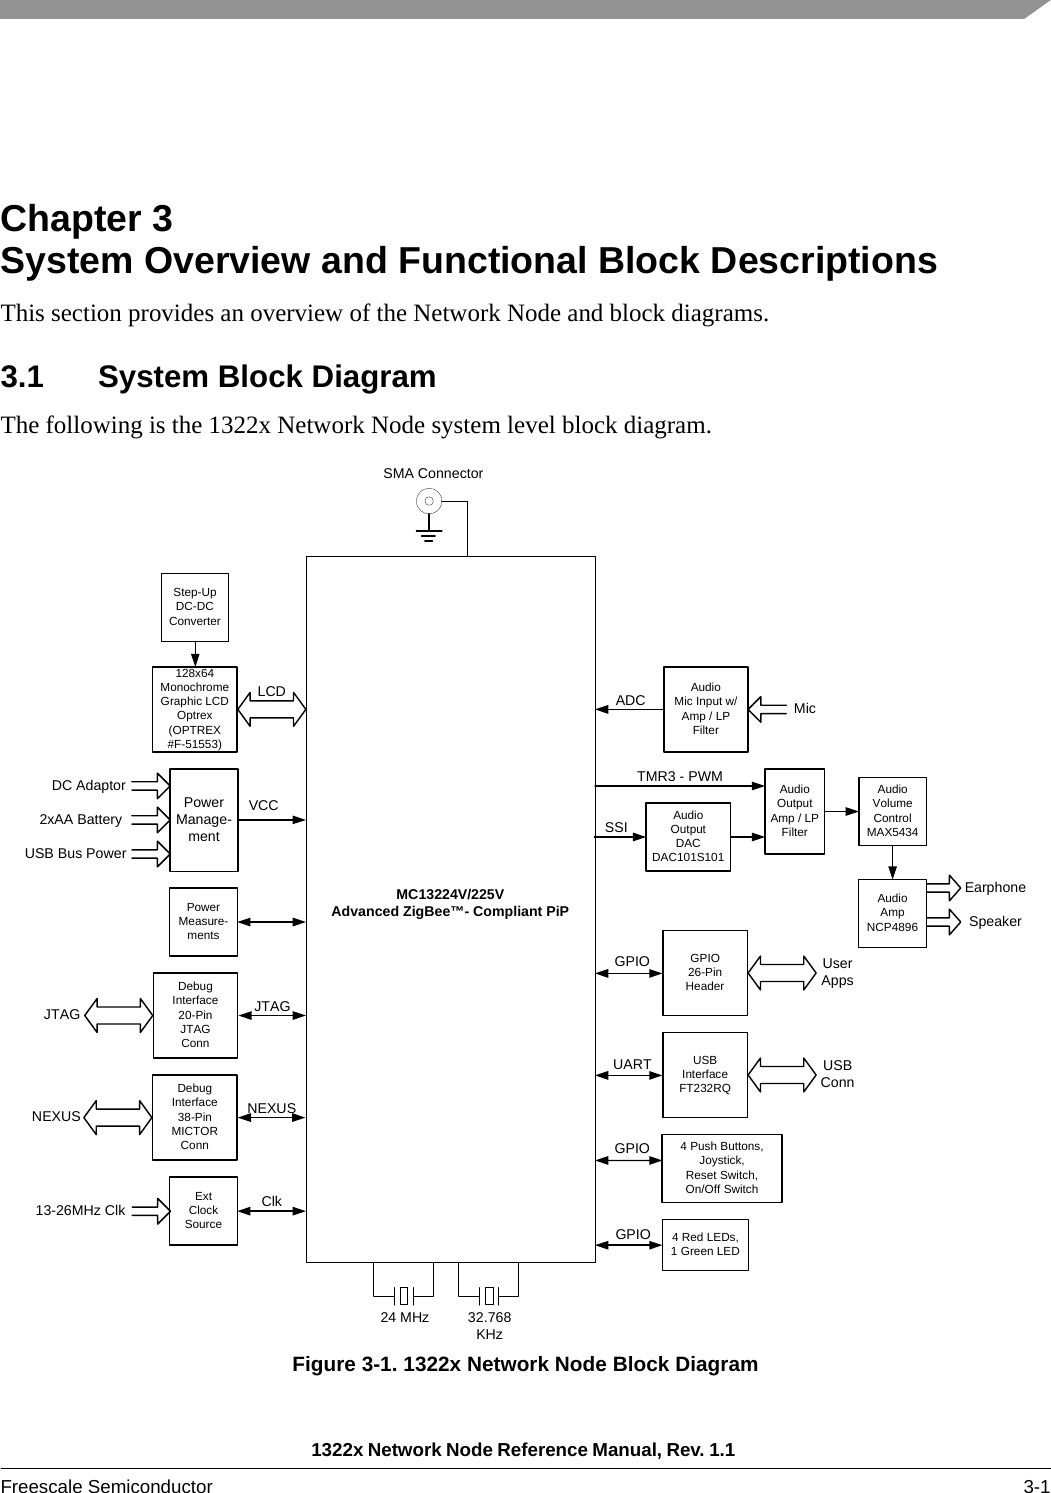 1322x Network Node Reference Manual, Rev. 1.1 Freescale Semiconductor 3-1Chapter 3  System Overview and Functional Block DescriptionsThis section provides an overview of the Network Node and block diagrams.3.1 System Block DiagramThe following is the 1322x Network Node system level block diagram.Figure 3-1. 1322x Network Node Block Diagram24 MHz 32.768KHzAudioOutputDACDAC101S101EarphonePowerManage-mentDC Adaptor2xAA BatteryUSB Bus PowerVCCMC13224V/225VAdvanced ZigBee™- Compliant PiPExtClockSource13-26MHz Clk ClkDebugInterface38-PinMICTORConnNEXUSNEXUSDebugInterface20-PinJTAGConnJTAGJTAGPowerMeasure-ments128x64MonochromeGraphic LCDOptrex(OPTREX#F-51553)LCDStep-UpDC-DCConverterSMA ConnectorAudioMic Input w/Amp / LP FilterADC MicSSITMR3 - PWM AudioOutputAmp / LPFilterAudioVolumeControlMAX5434AudioAmpNCP4896 SpeakerGPIO26-PinHeaderGPIO User AppsUSBInterfaceFT232RQUART USBConnGPIO 4 Push Buttons, Joystick,Reset Switch,On/Off SwitchGPIO 4 Red LEDs,1 Green LED